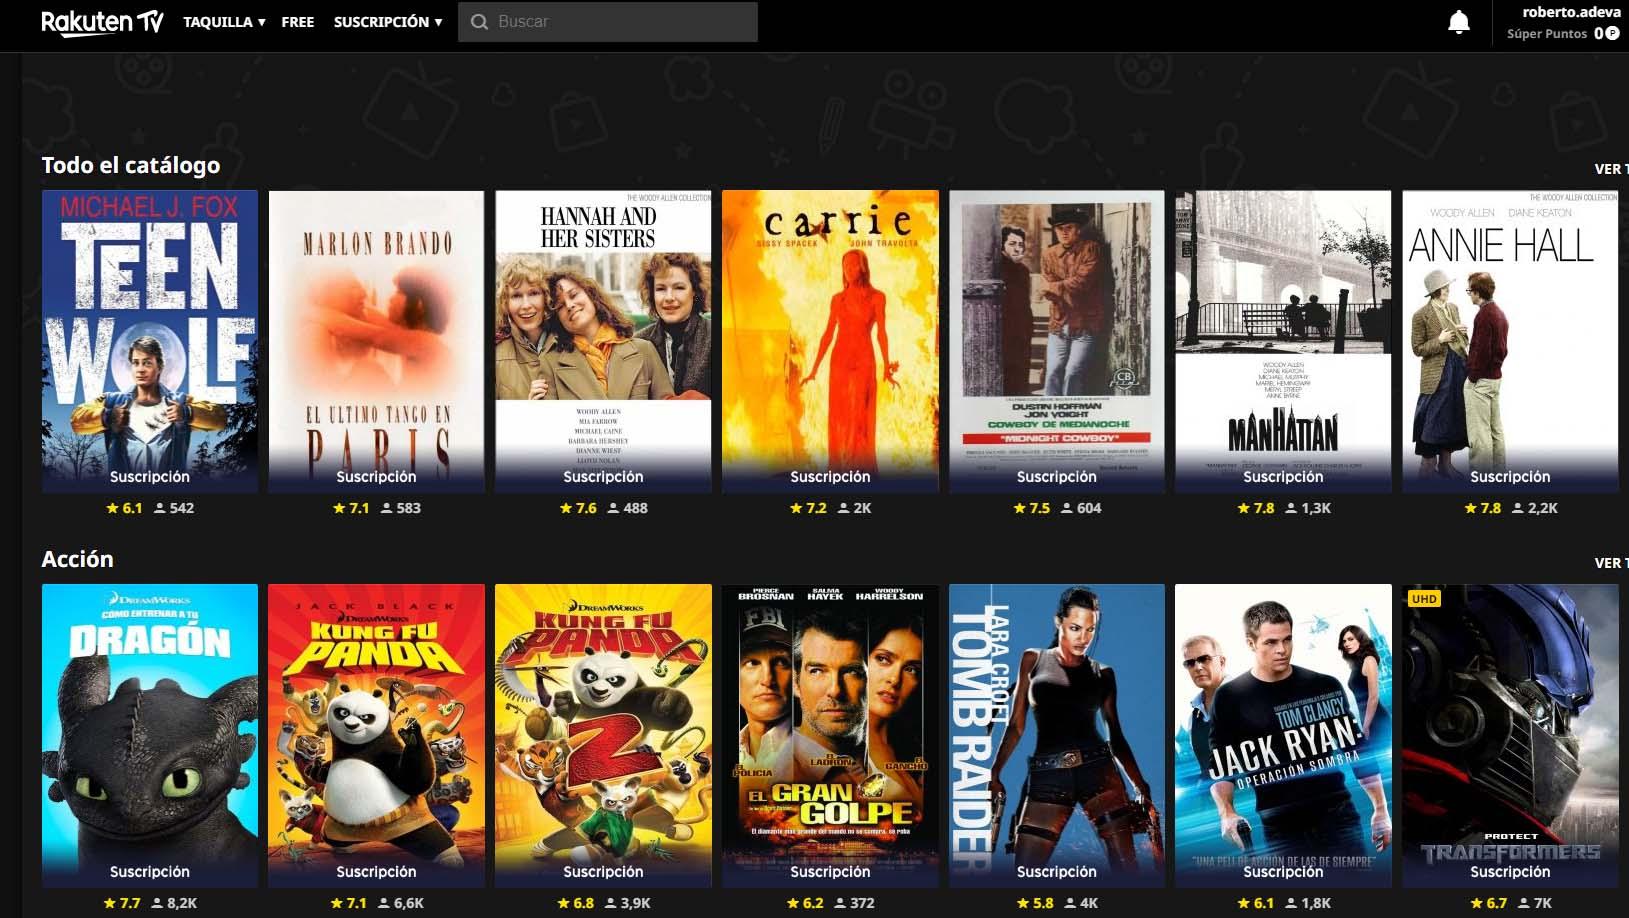 Rakuten TV to Watch Movies: Features, Price and Subscription